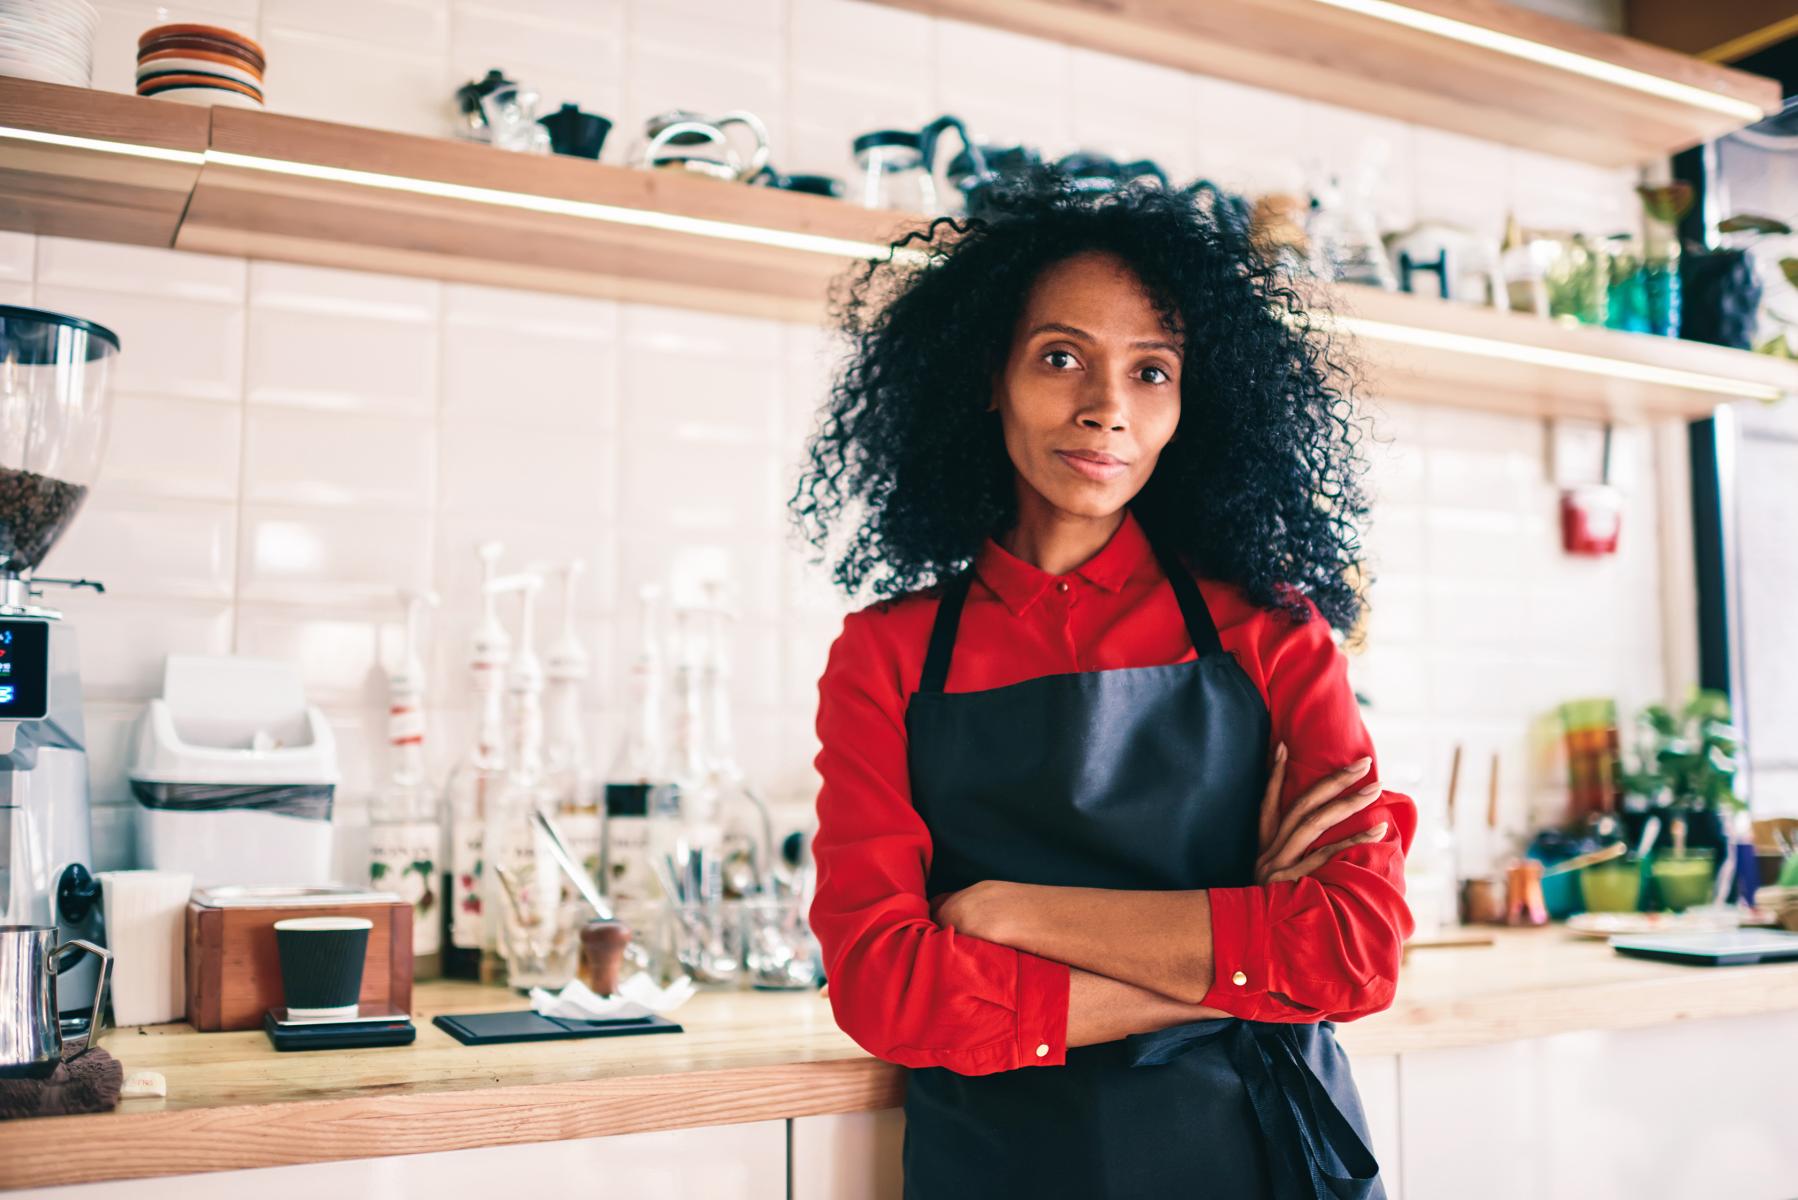 Minority Woman in Commercial Kitchen